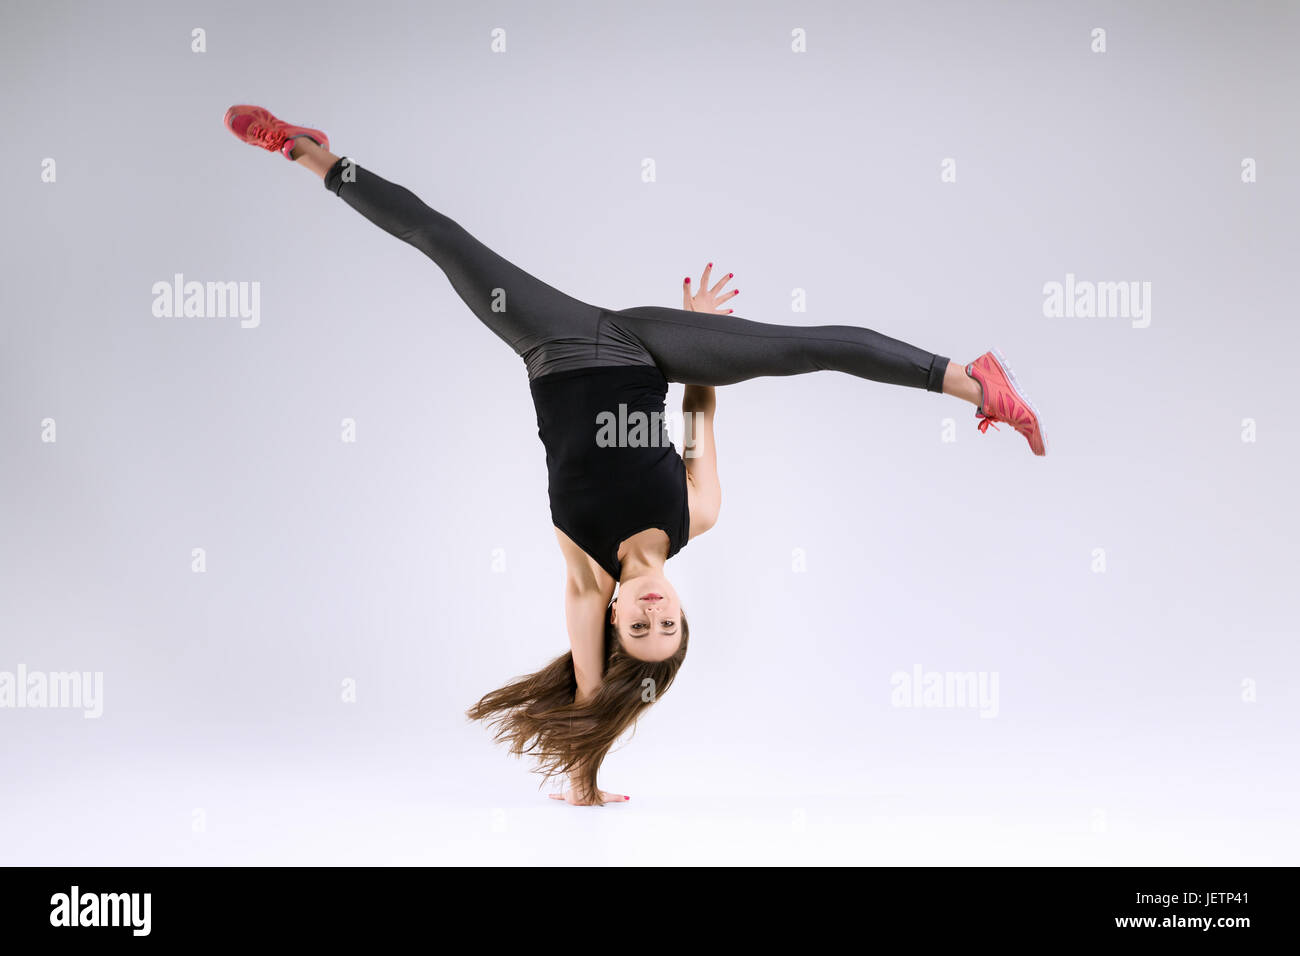 Girl in jump on a gray background Stock Photo